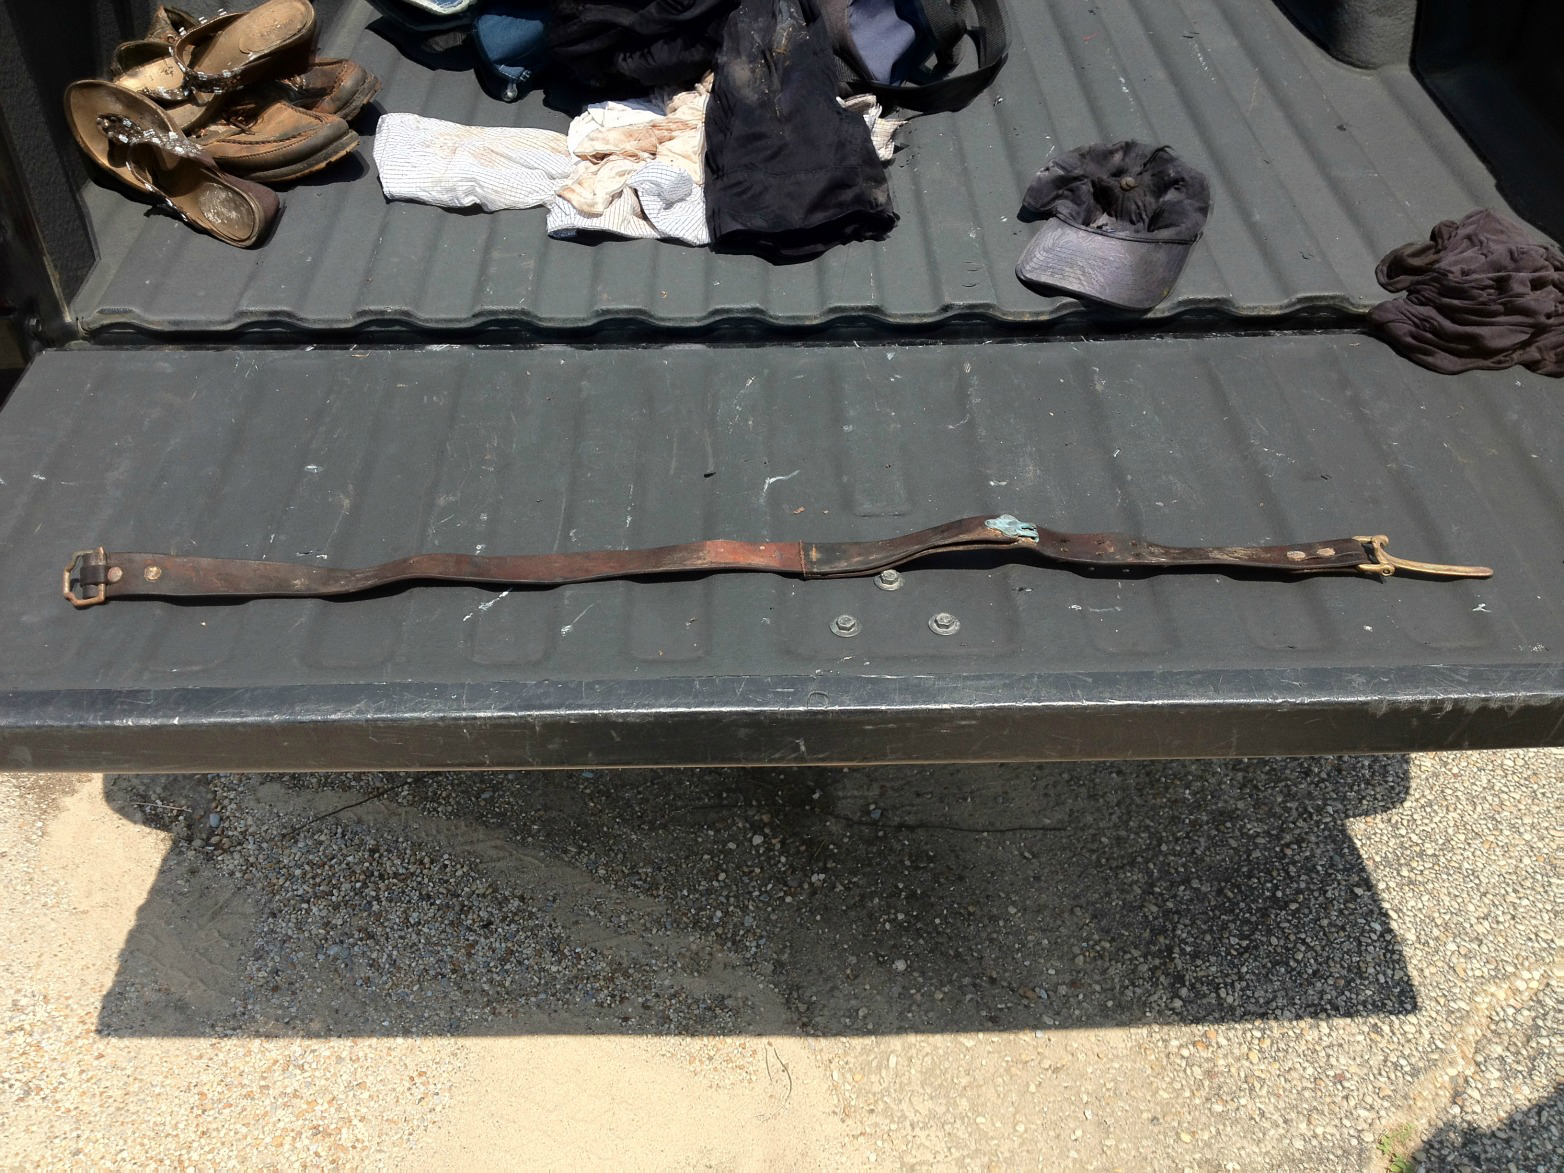 Worn and moldy No. 5 Cinch Belt, laid out on truck